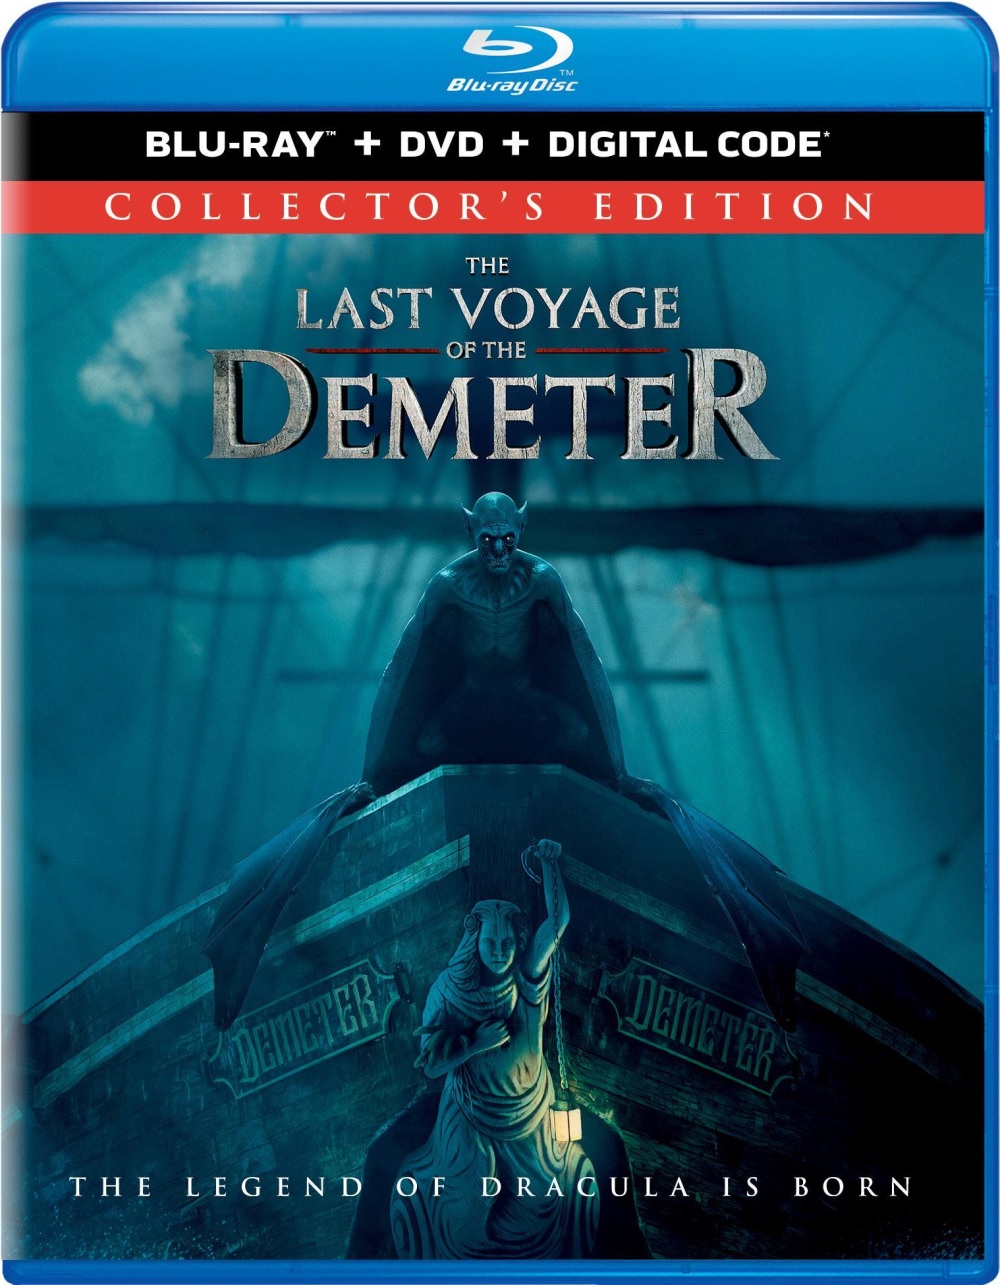 Review: 'The Last Voyage of the Demeter